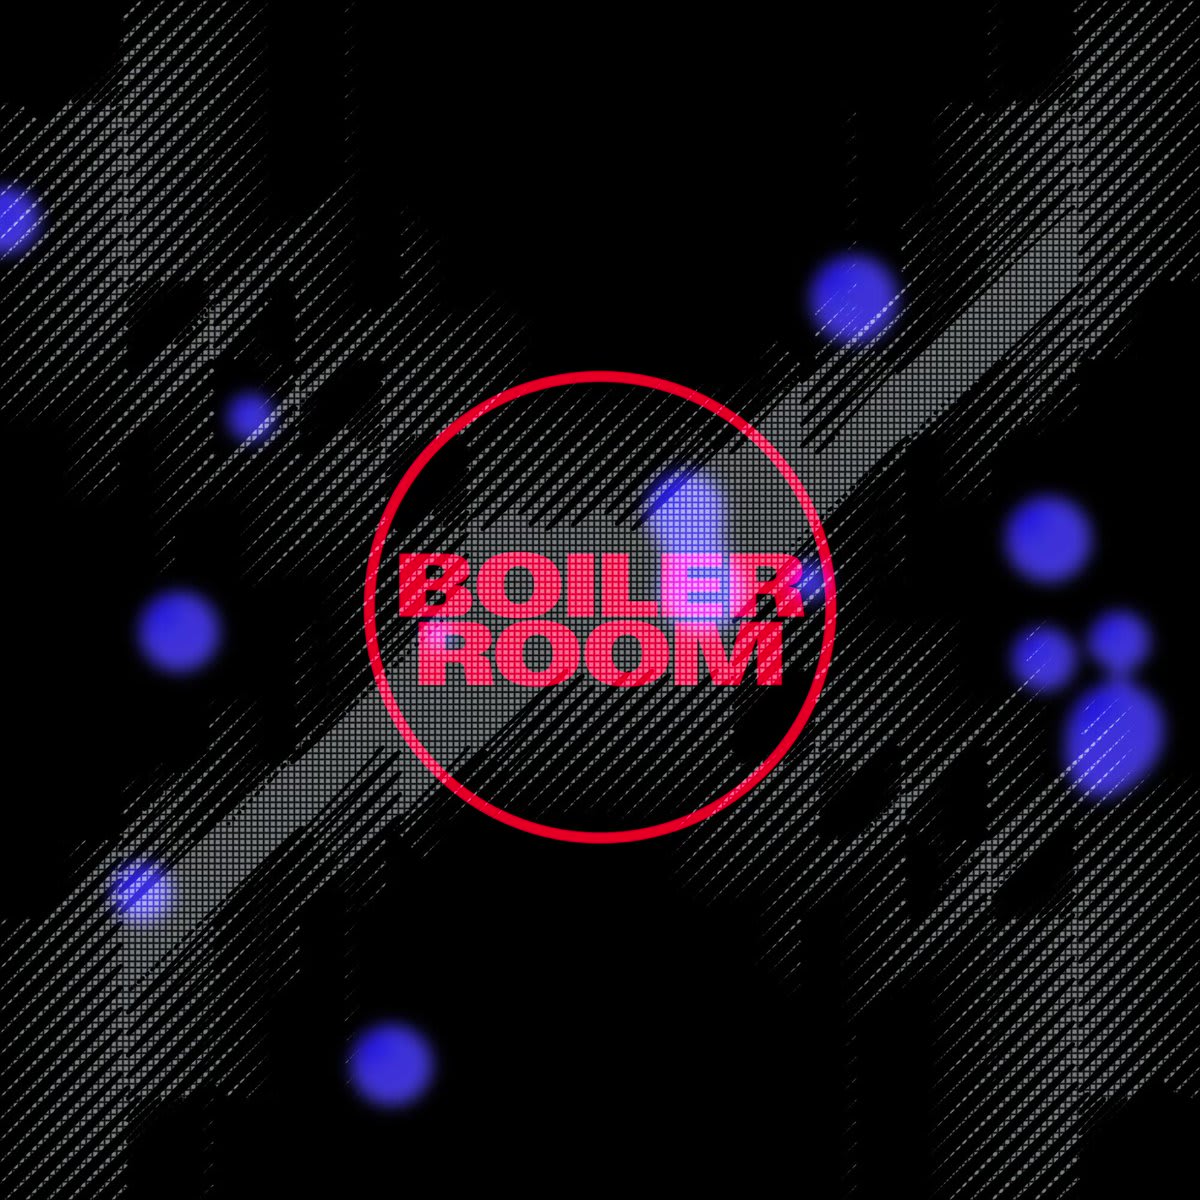 Boiler Room X – our new collaborative tour – is coming to the USA to showcase a new wave of underground collectives in less frequented and debut cities for us. Join us in your city - tickets on sale now ⇢ https://t.co/FCjnBHjouH 🔊 @BlackRaveCult - Activate